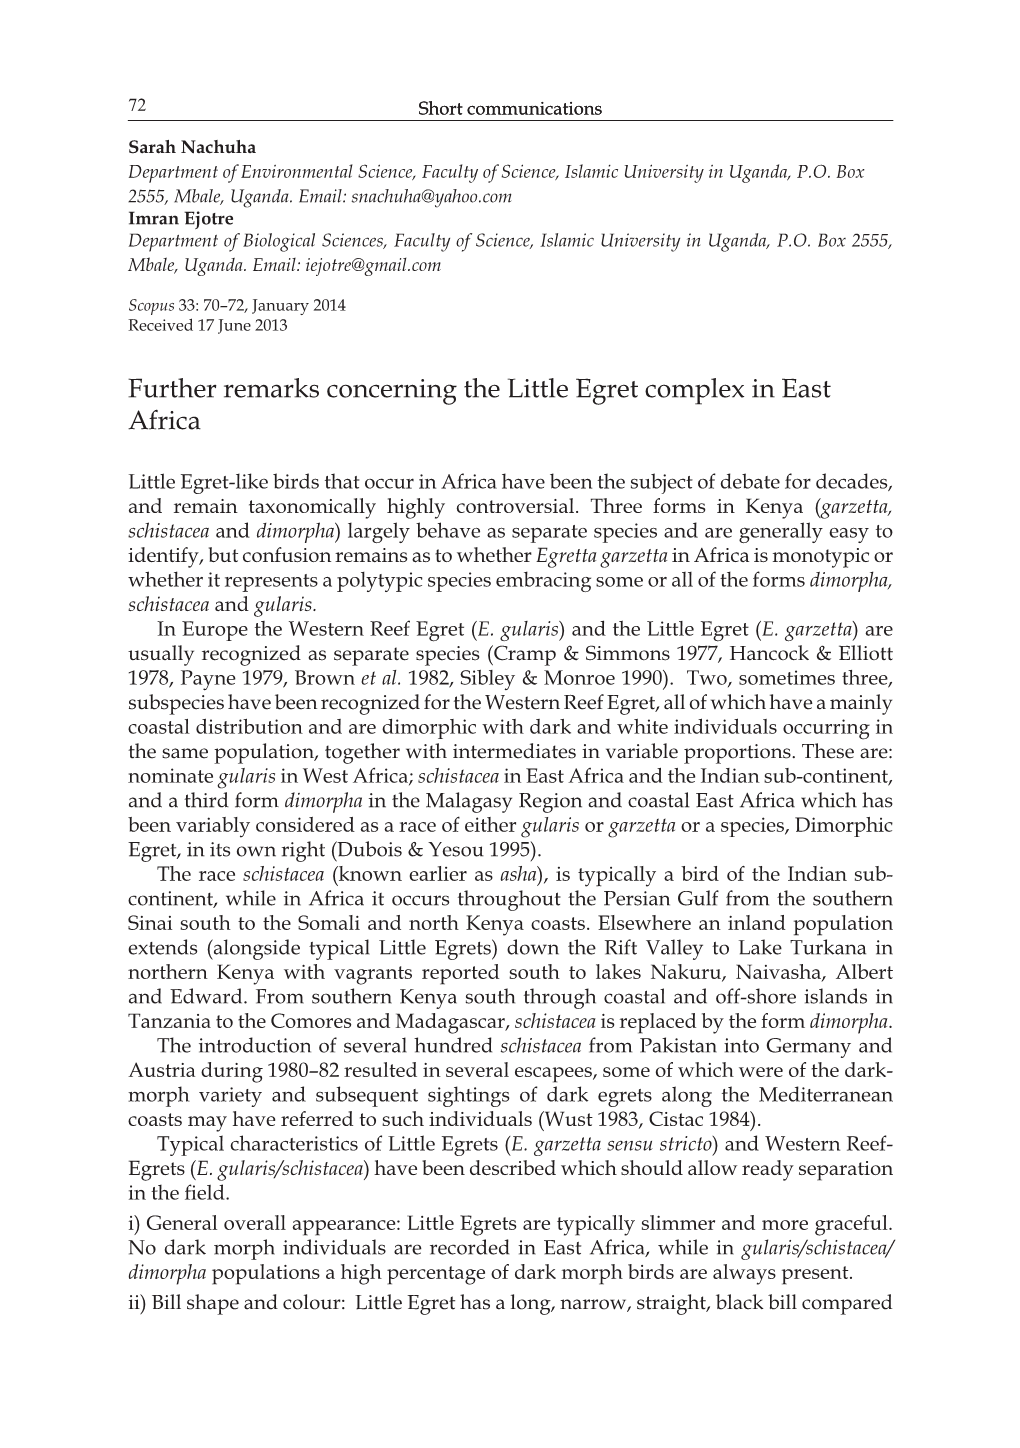 Further Remarks Concerning the Little Egret Complex in East Africa